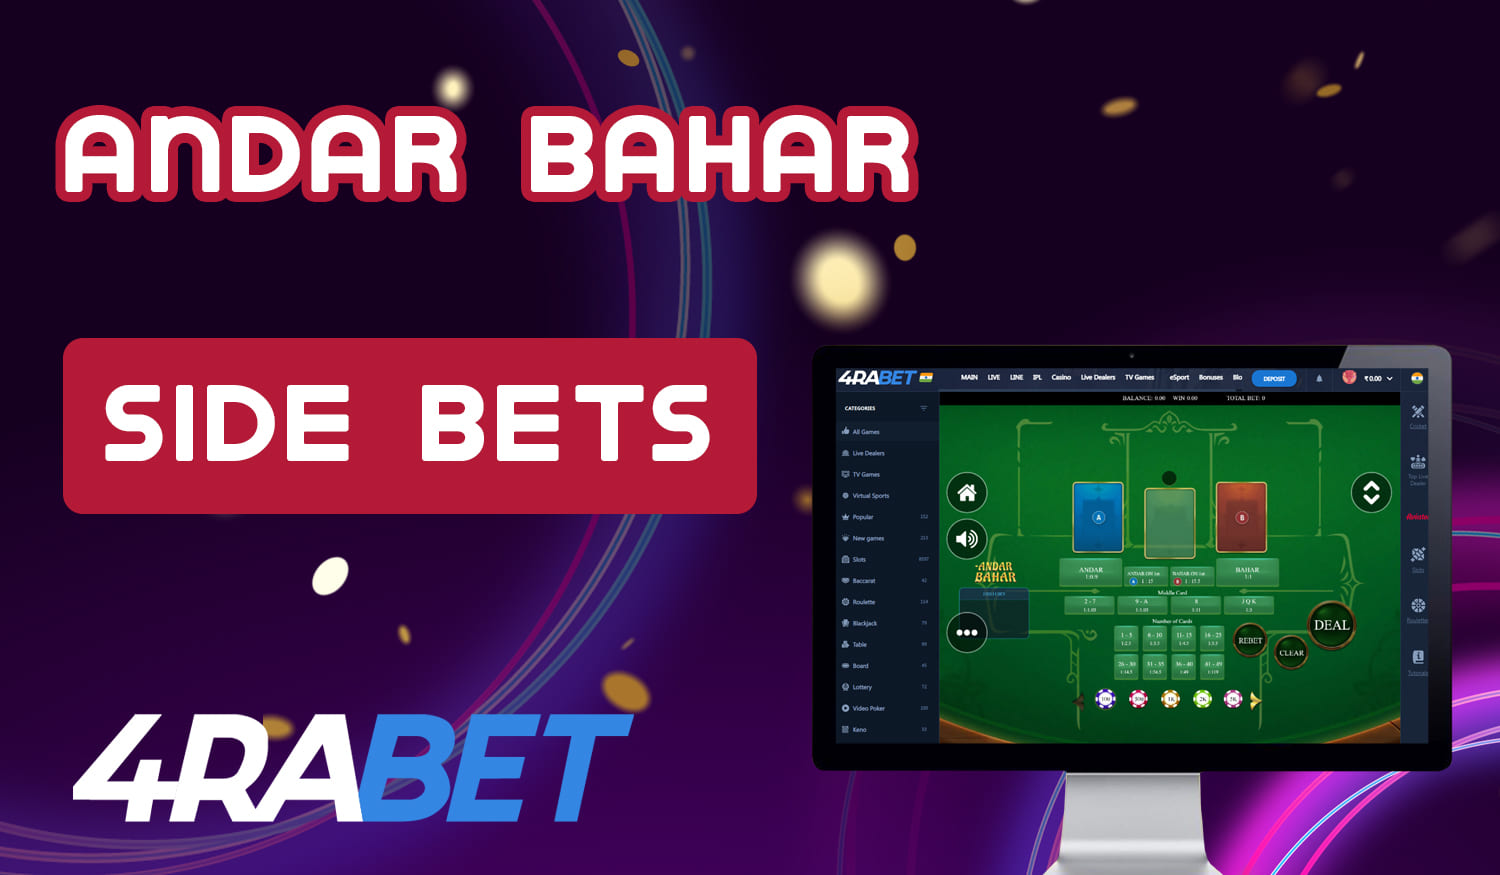 Side Bets in Andar Bahar for Indian customers on 4raBet